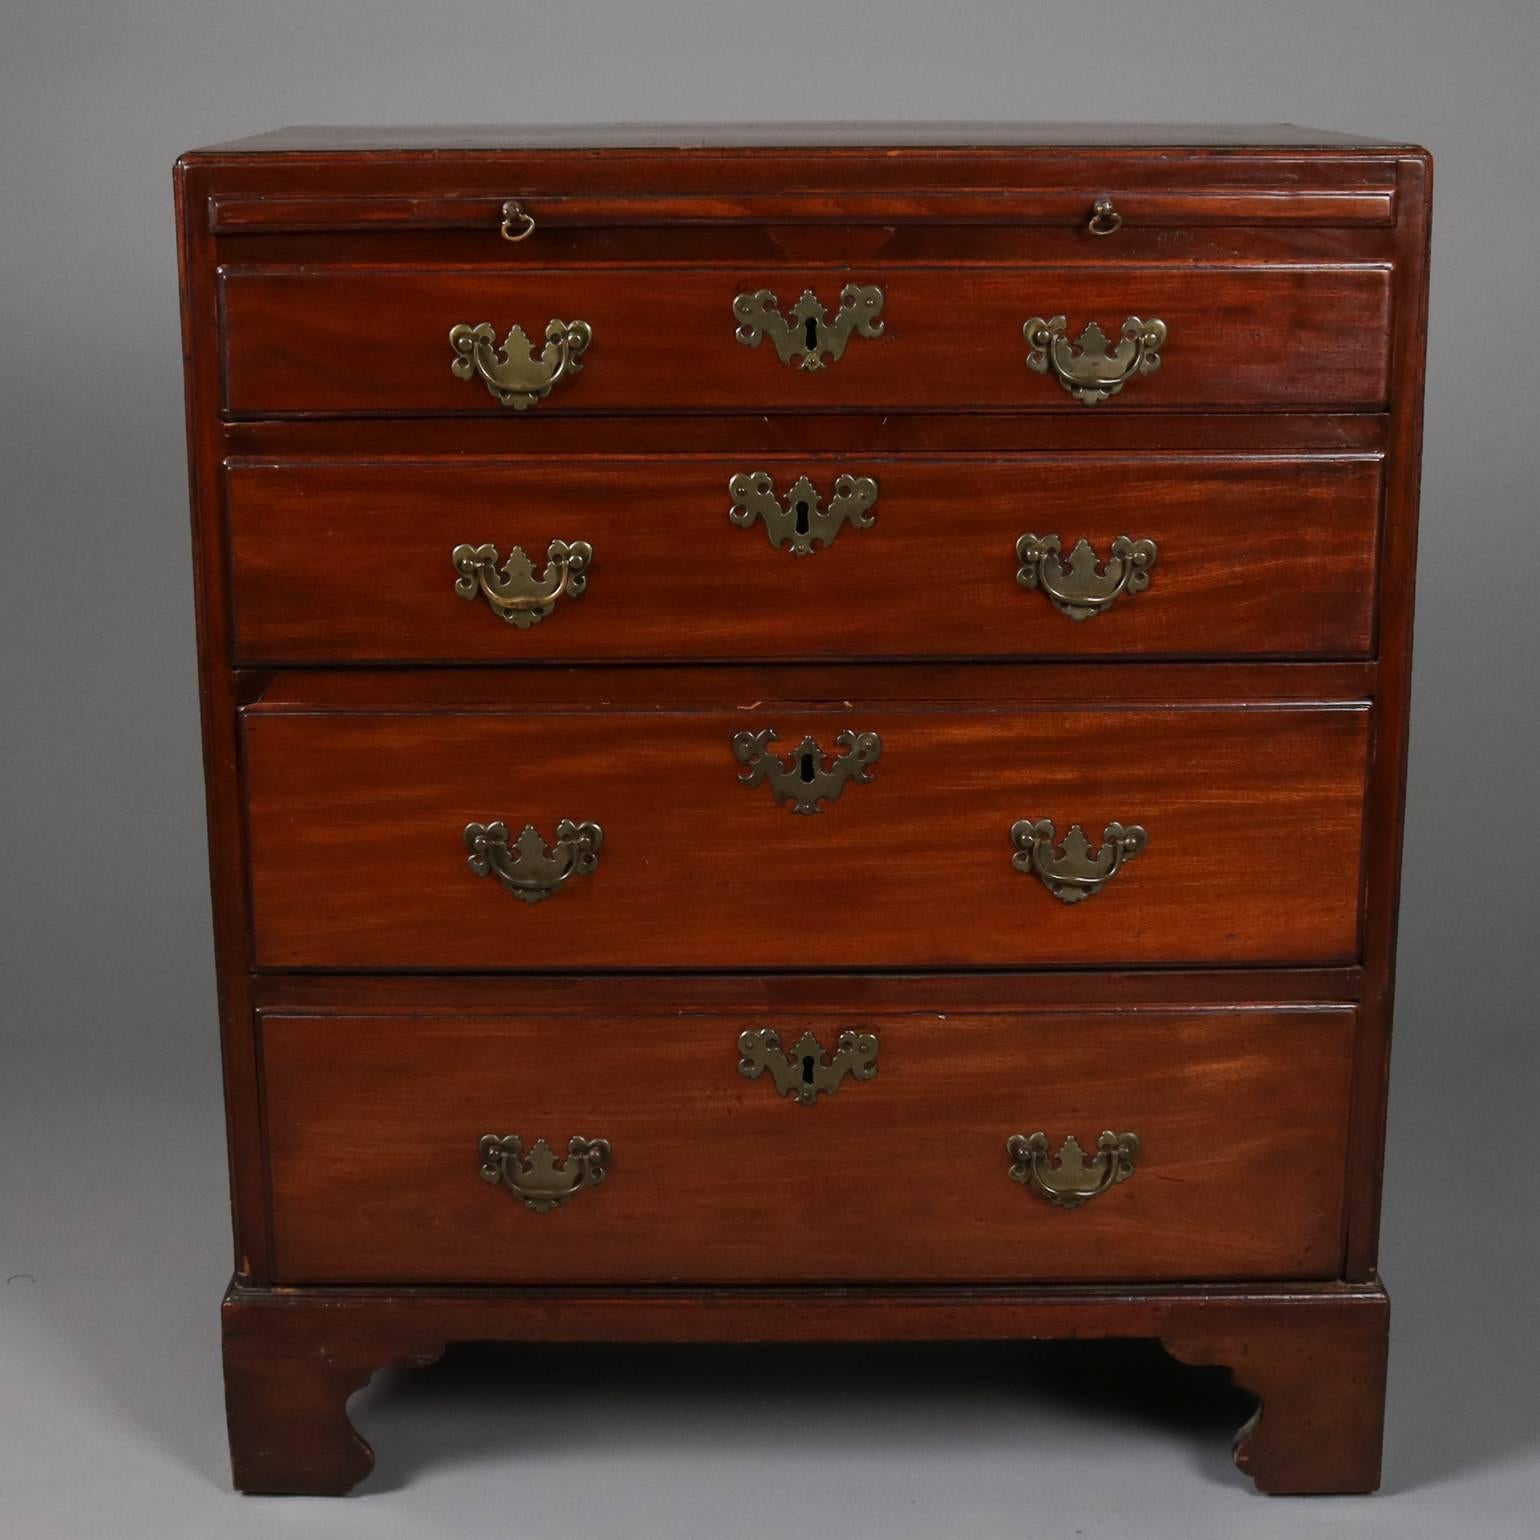 18th century antique English mahogany silverware chest features four drawers, pull out work tray and bronze hardware, seated on ogee legs.

Measures - 34"H X 28.5"W X 17"D.